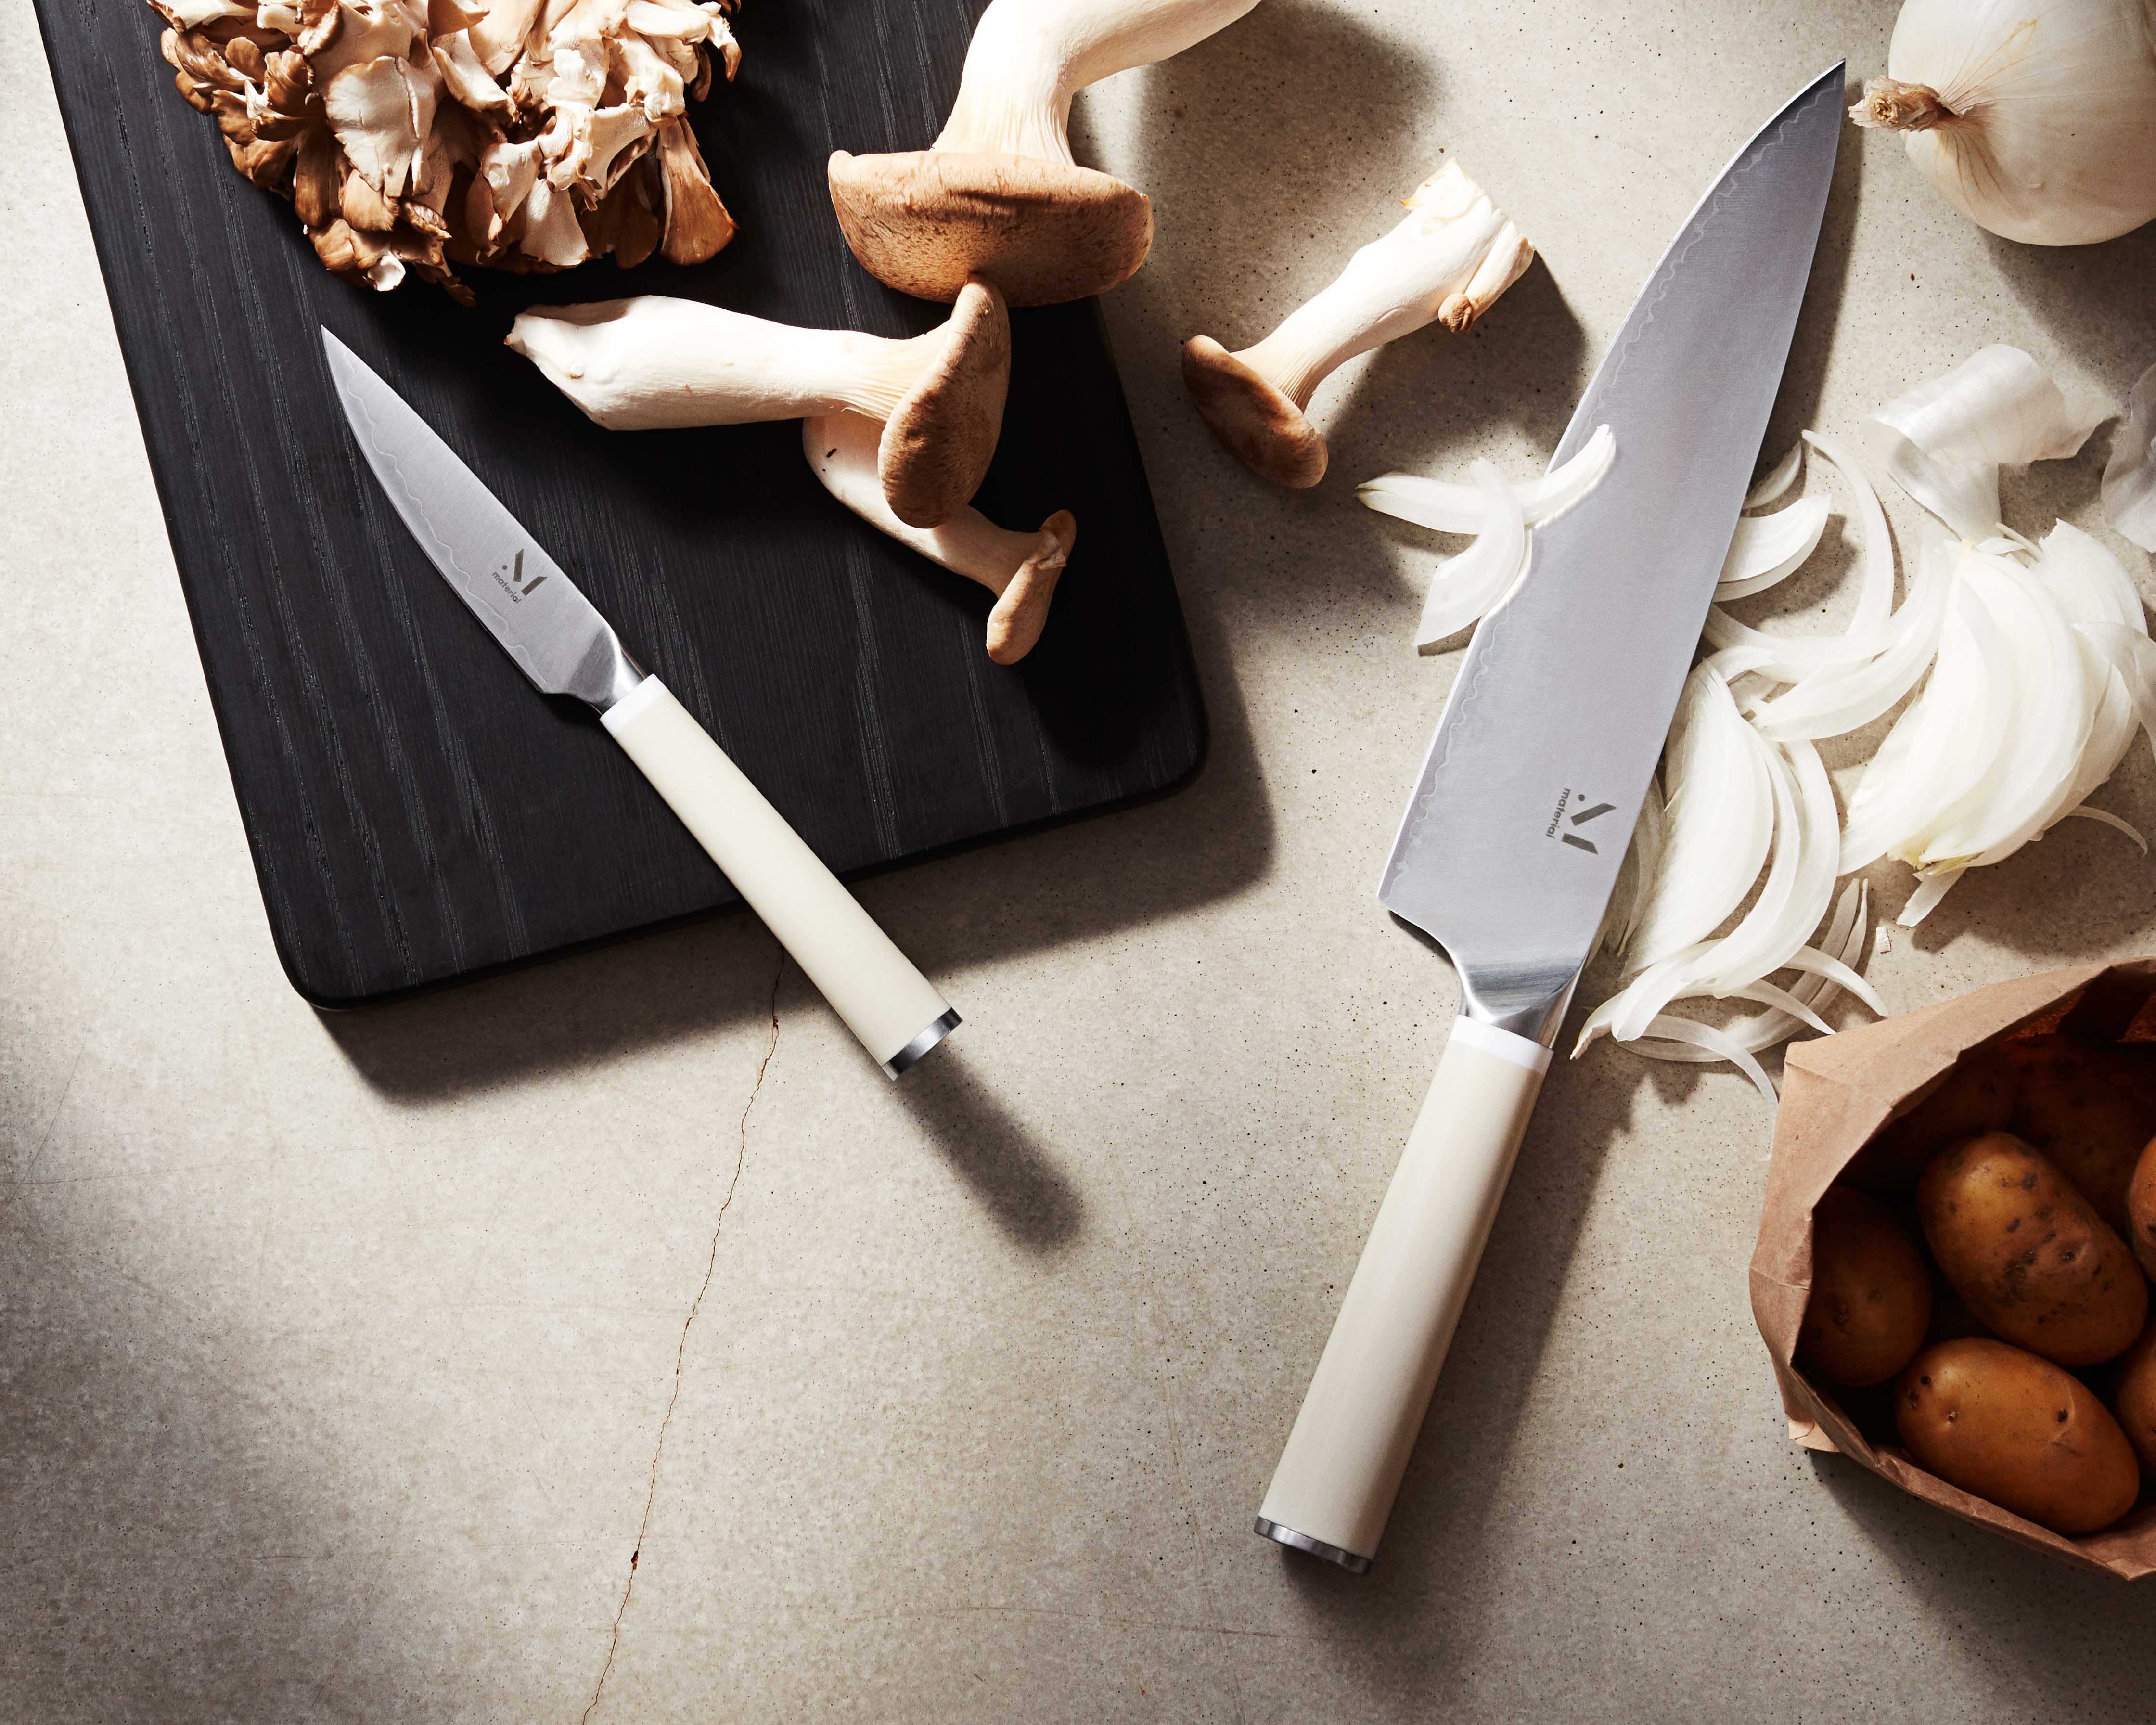 The 8 Knife: Thoughtfully Designed, Affordably Priced